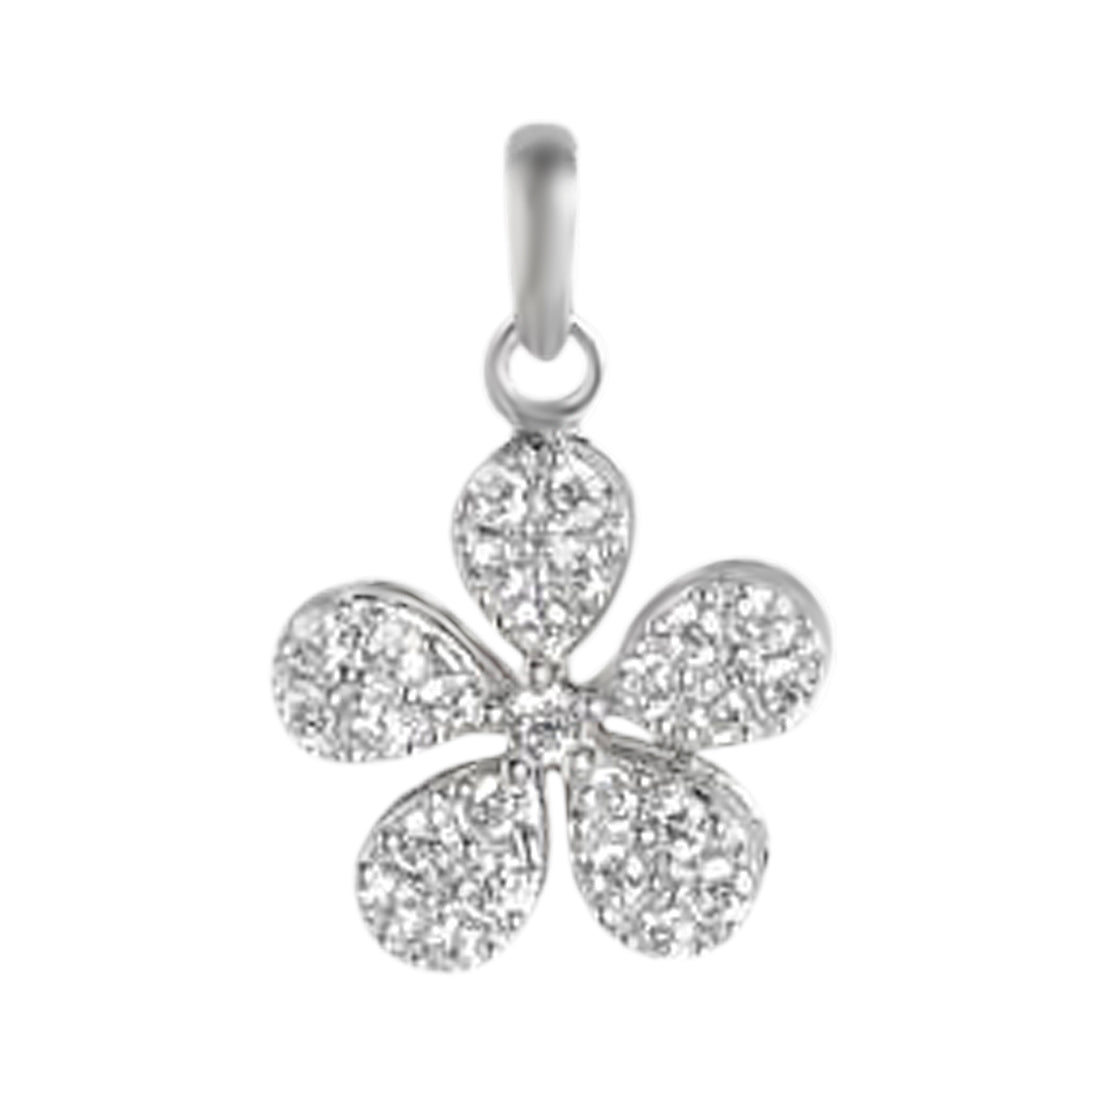 Enchanted CZ Blooms 925 Sterling Silver Flower Pendant with Chain